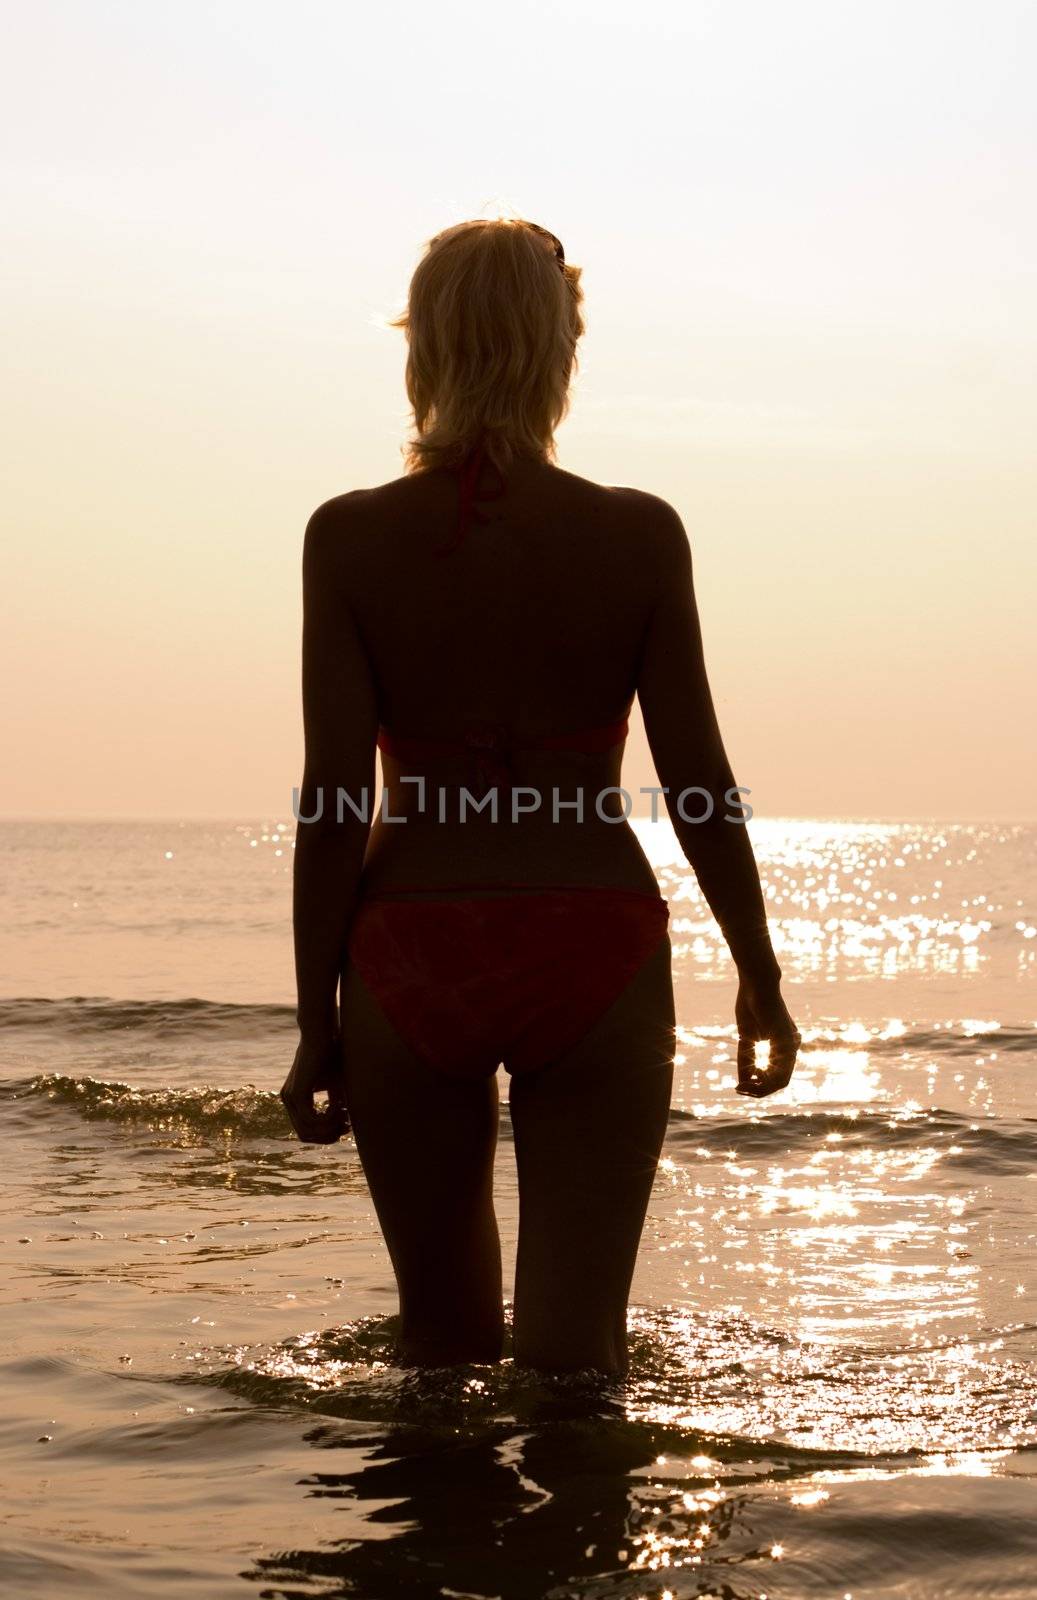 fit blond at the beach silhouette image